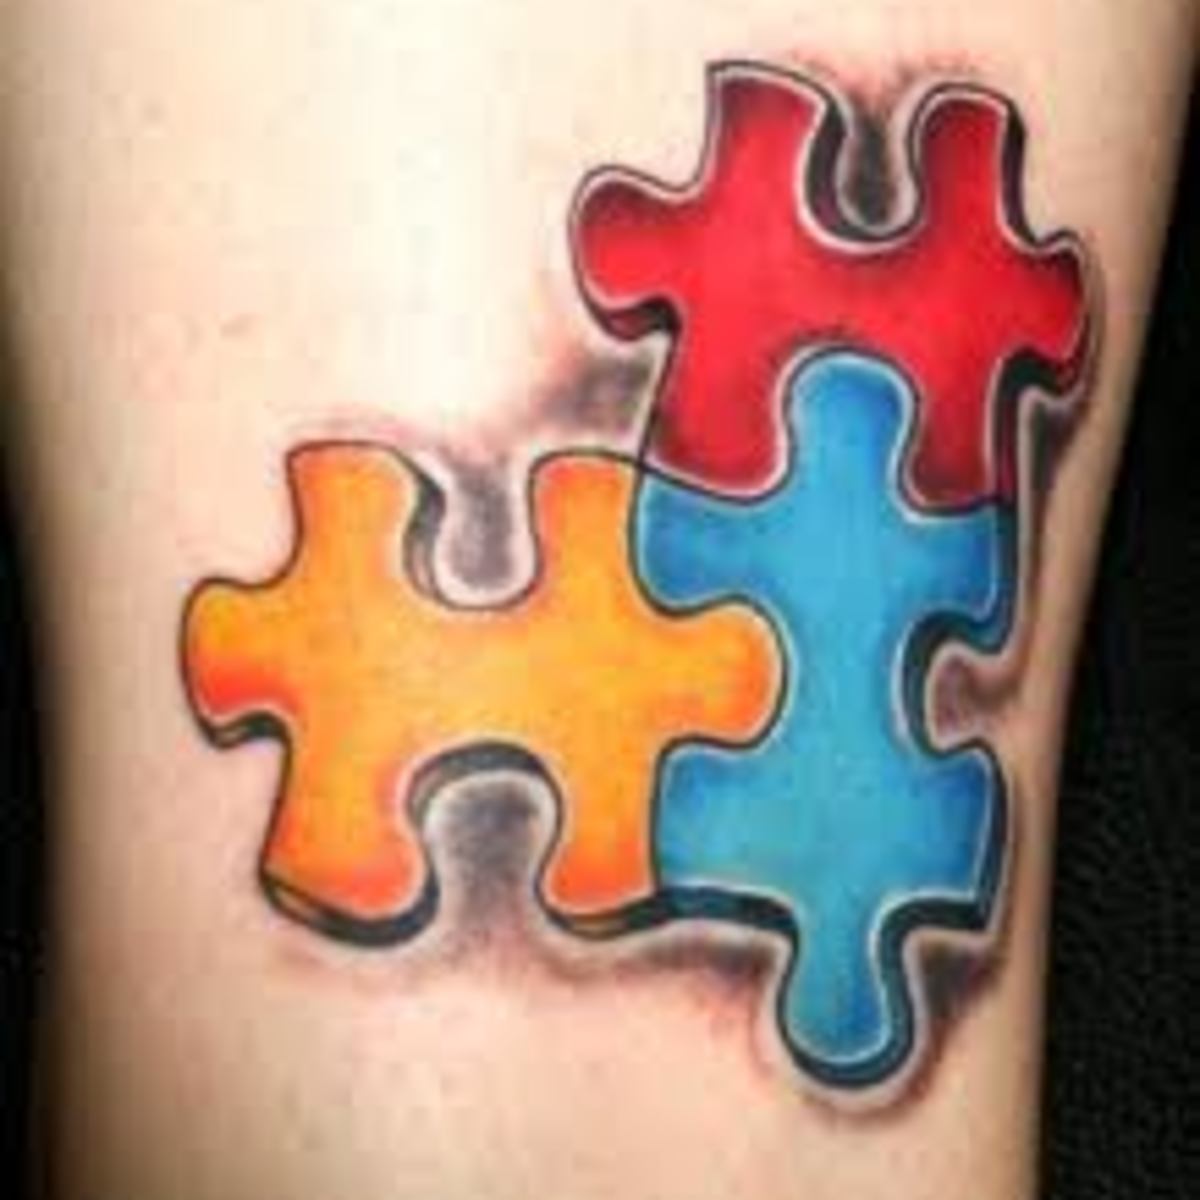 Autism Tattoos And Designs Autism Tattoo Meanings And Ideas Autistic Tattoo Designs Hubpages